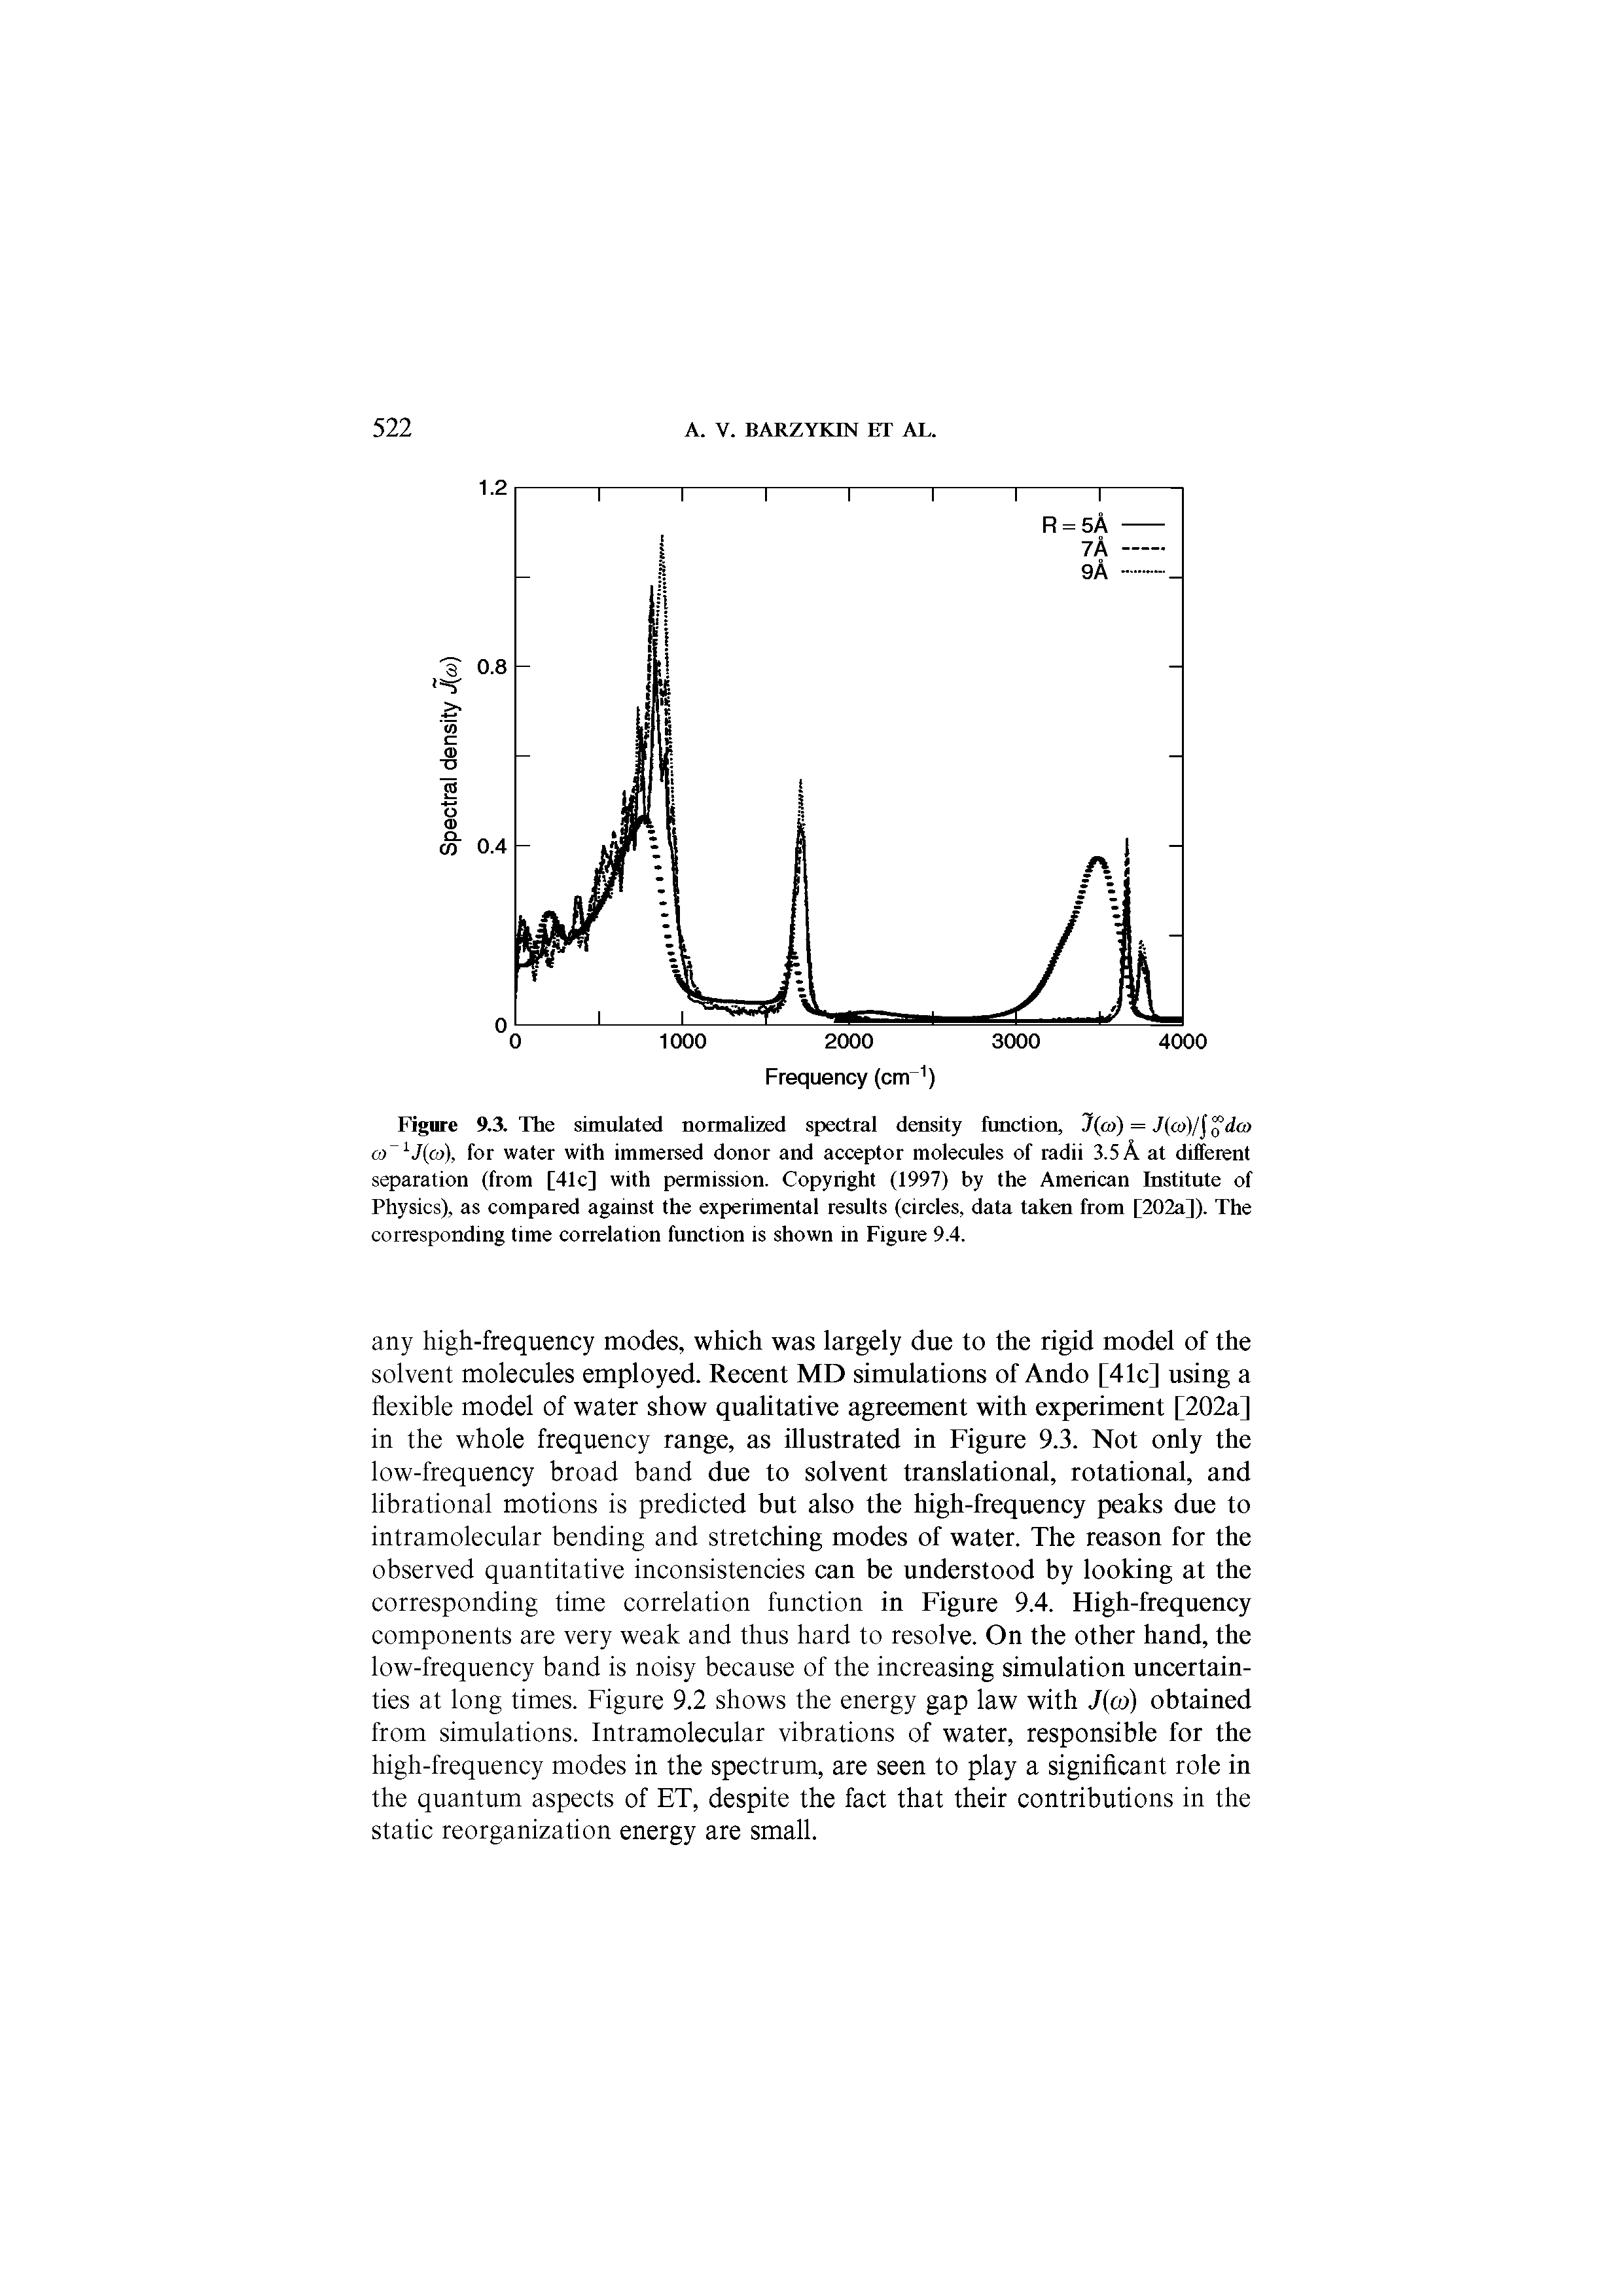 Figure 9.3. The simulated normalized spectral density function, J(cd) = J(a>)/ oda> ct) V(ct>), for water with immersed donor and acceptor molecules of radii 3.5 A at different separation (from [41c] with permission. Copyright (1997) by the American Institute of Physics), as compared against the experimental results (circles, data taken from [202a]). The corresponding time correlation function is shown in Figure 9.4.